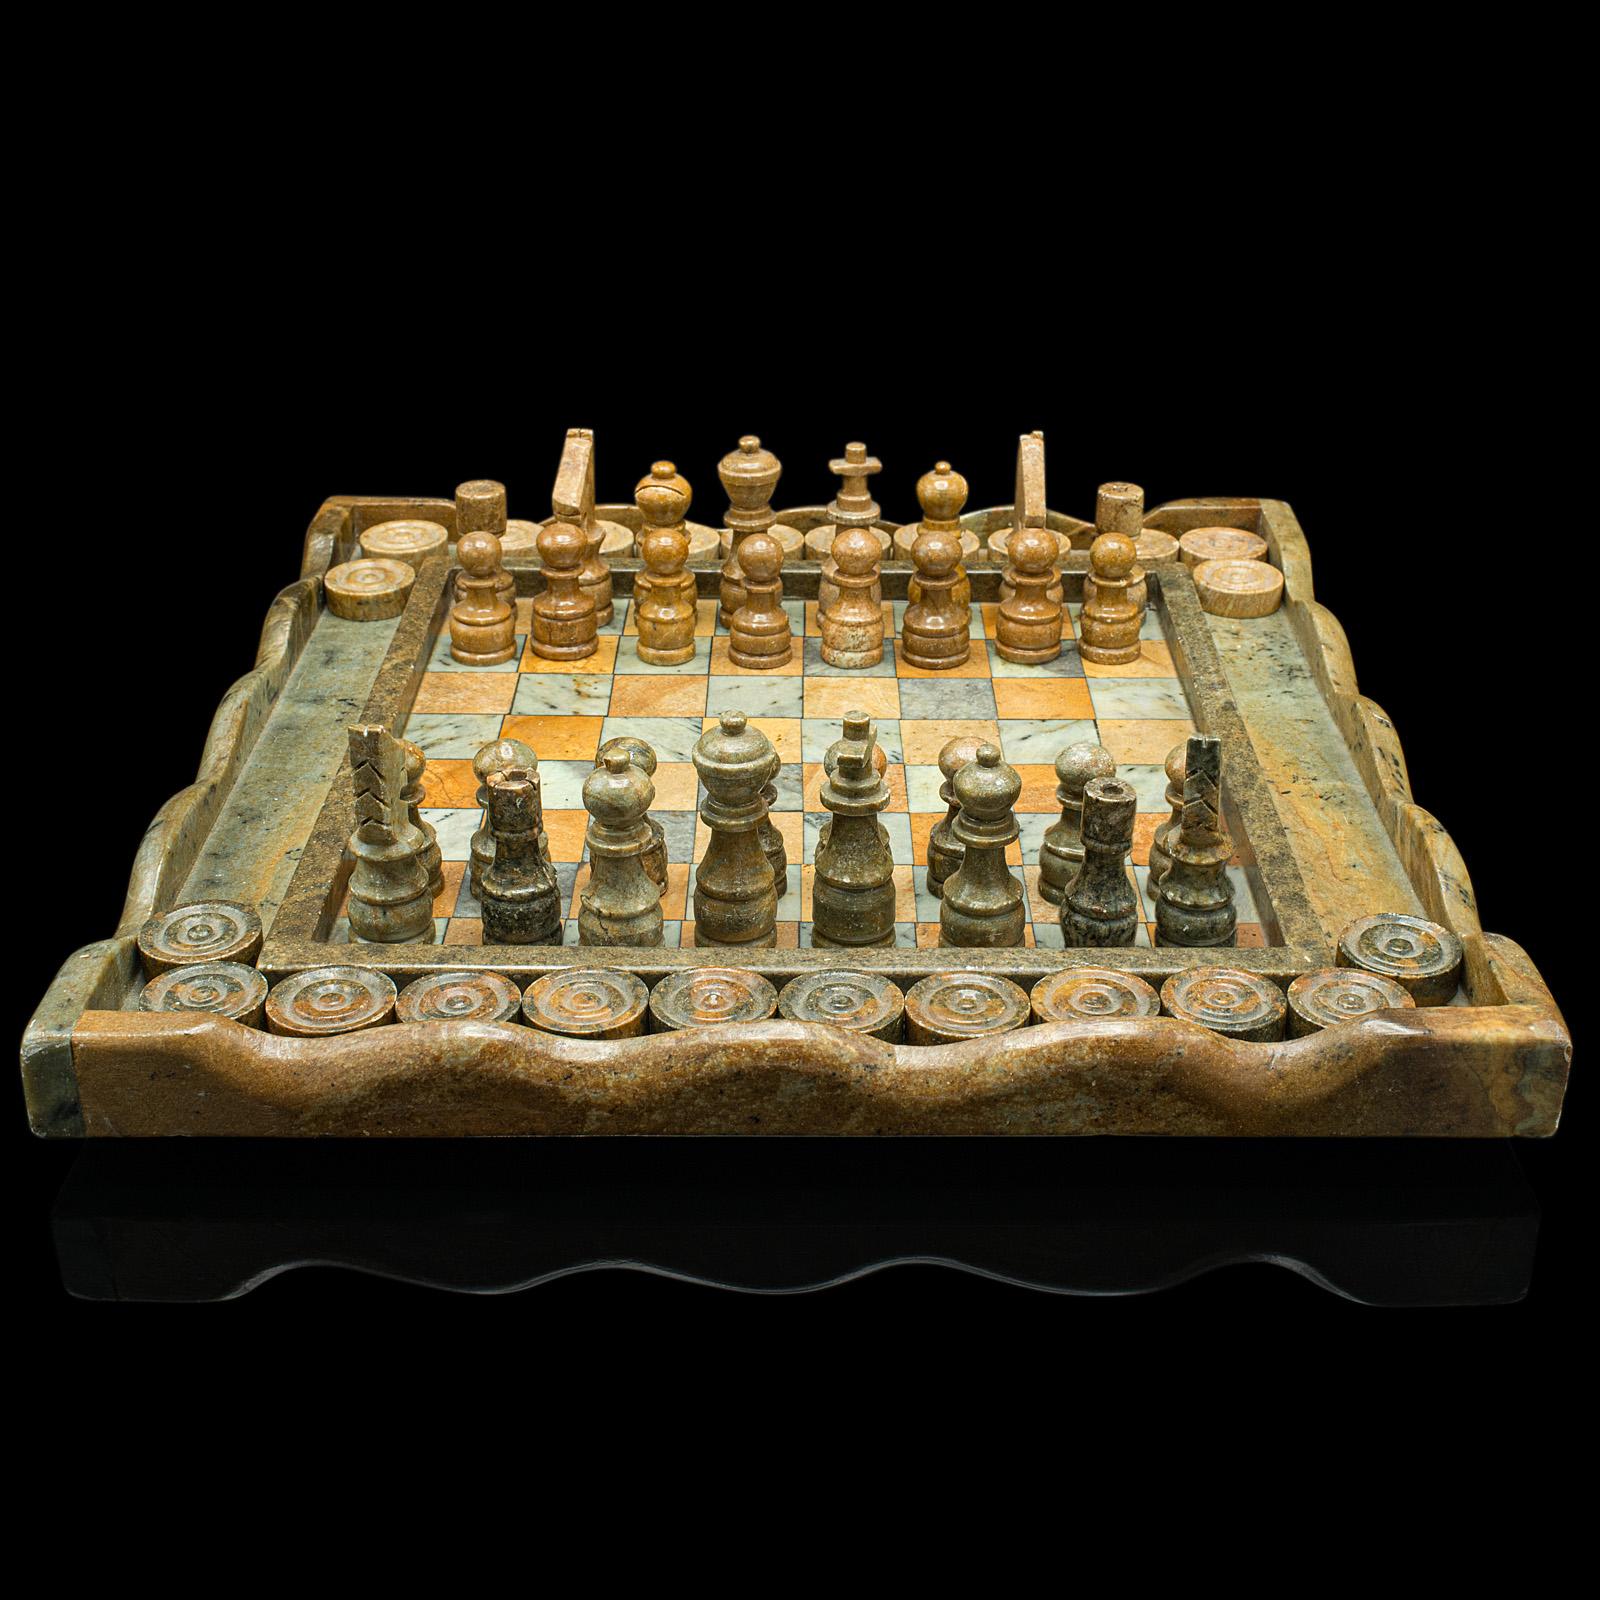 This is a vintage chess and draughts board. An English, hardstone and marble gaming set, dating to the late 20th century, circa 1970.

Dual purpose gaming set with fascinating natural detail
Displays a desirable aged patina throughout
Hardstone and